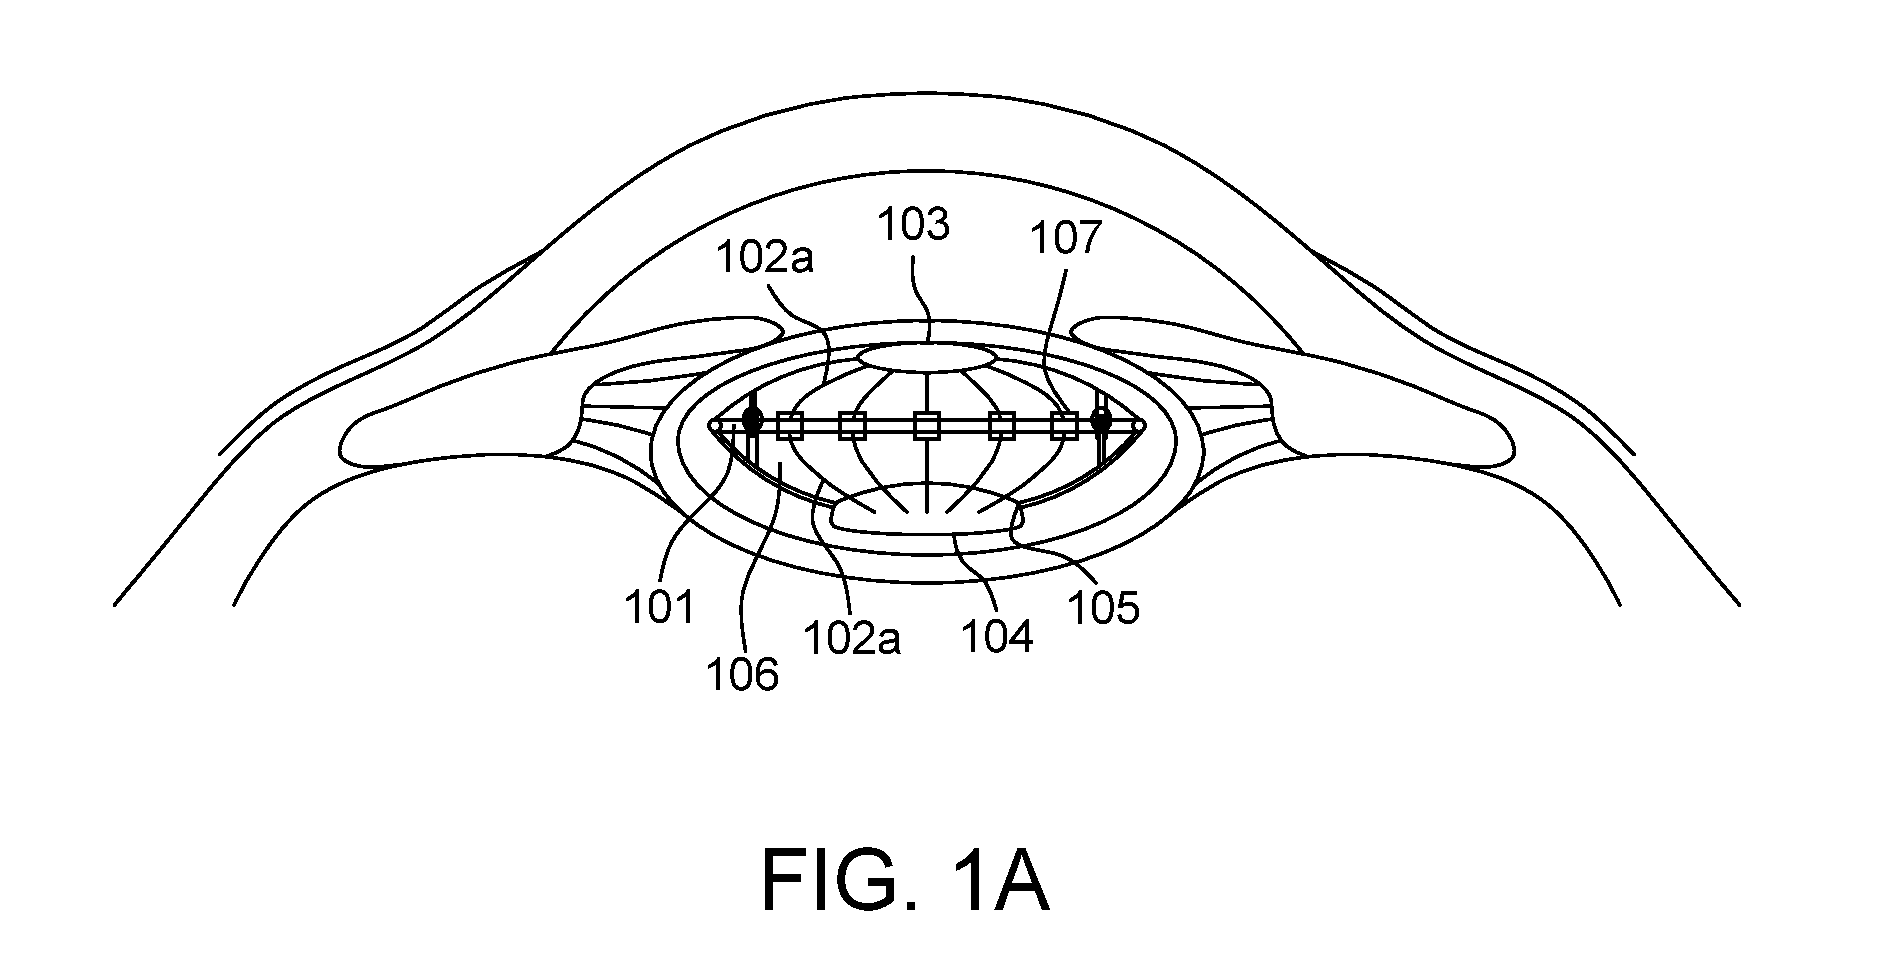 Intraocular lens (IOL) with multi optics assembly